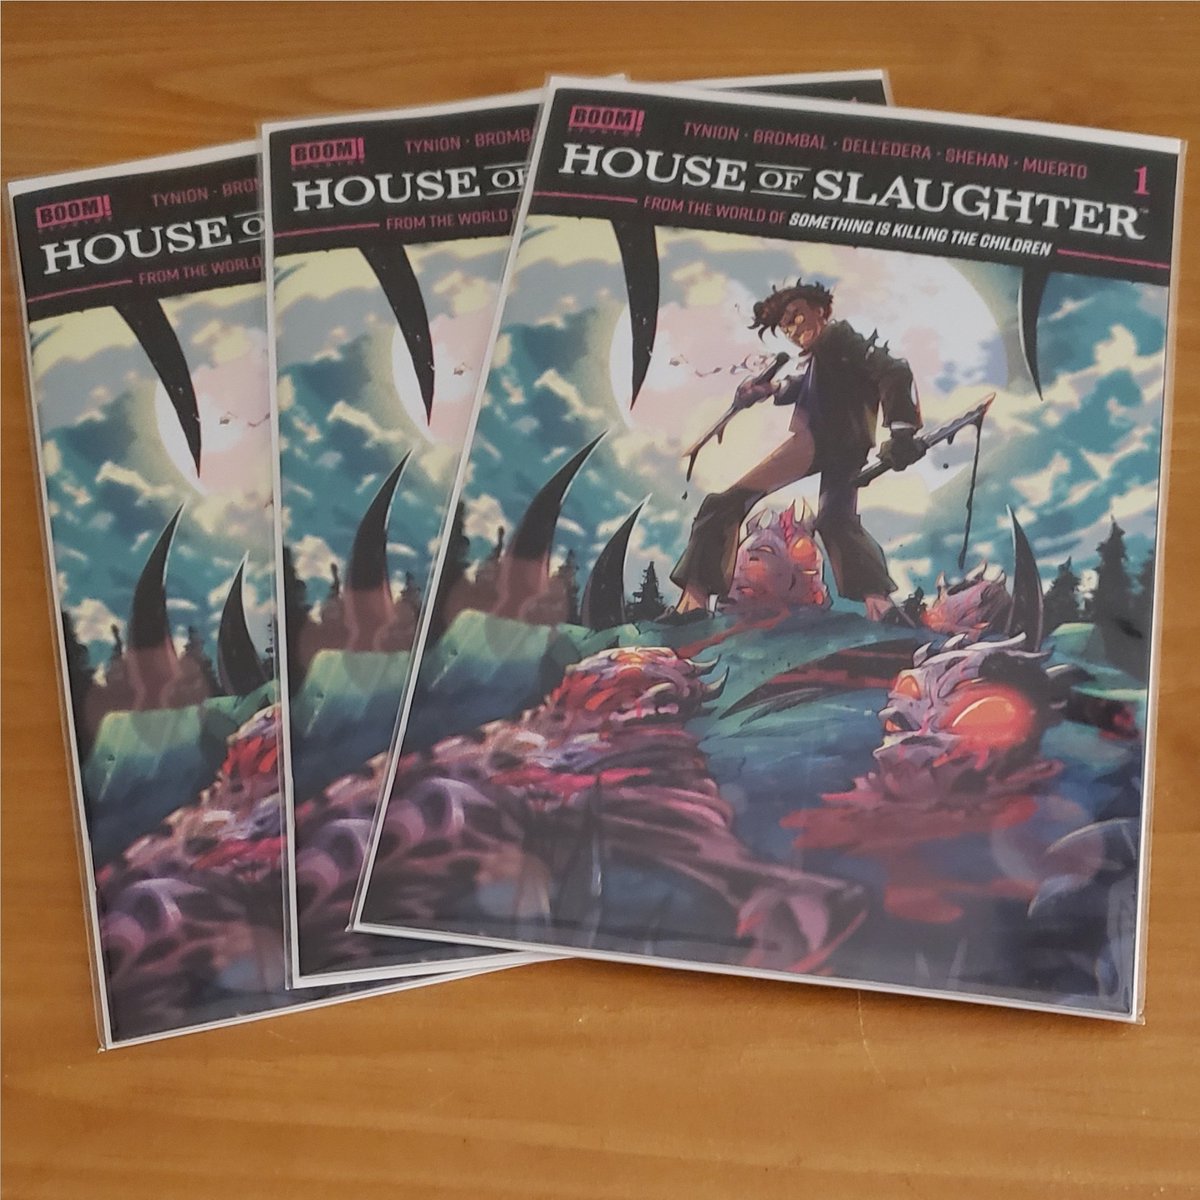 📦 Thursday #mailcall House of Slaughter #1 Tiny Onion variant! 

#TheHoo7igans #comicbooks #houseofslaughter #siktc #indiecomics #BoomStudios #boomcomics #variantcover #comiccover #tinyonion #jamestynioniv #wertherdelledera #tatebrombal #chrisshehan #horrorcomics #horrorstories